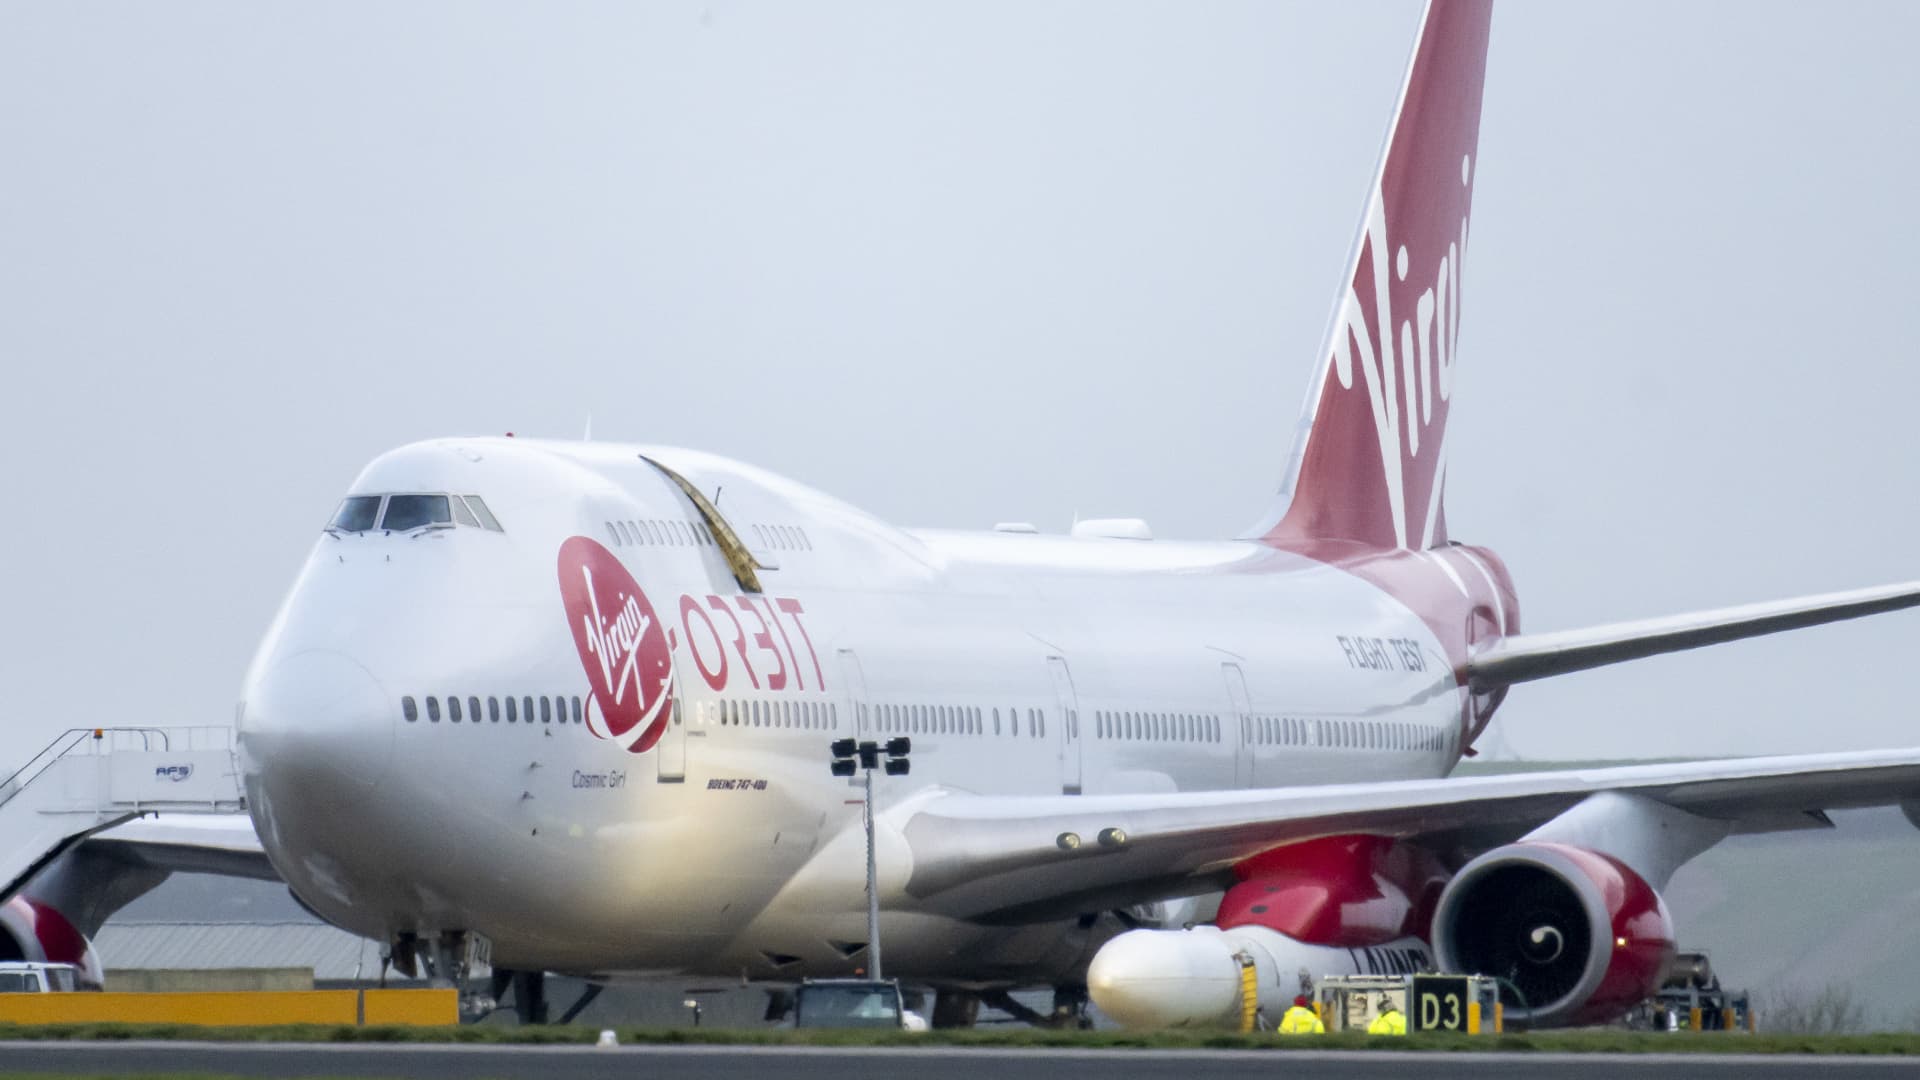 Virgin Orbit extends unpaid pause as Brown deal collapses, 'dynamic' talks continue